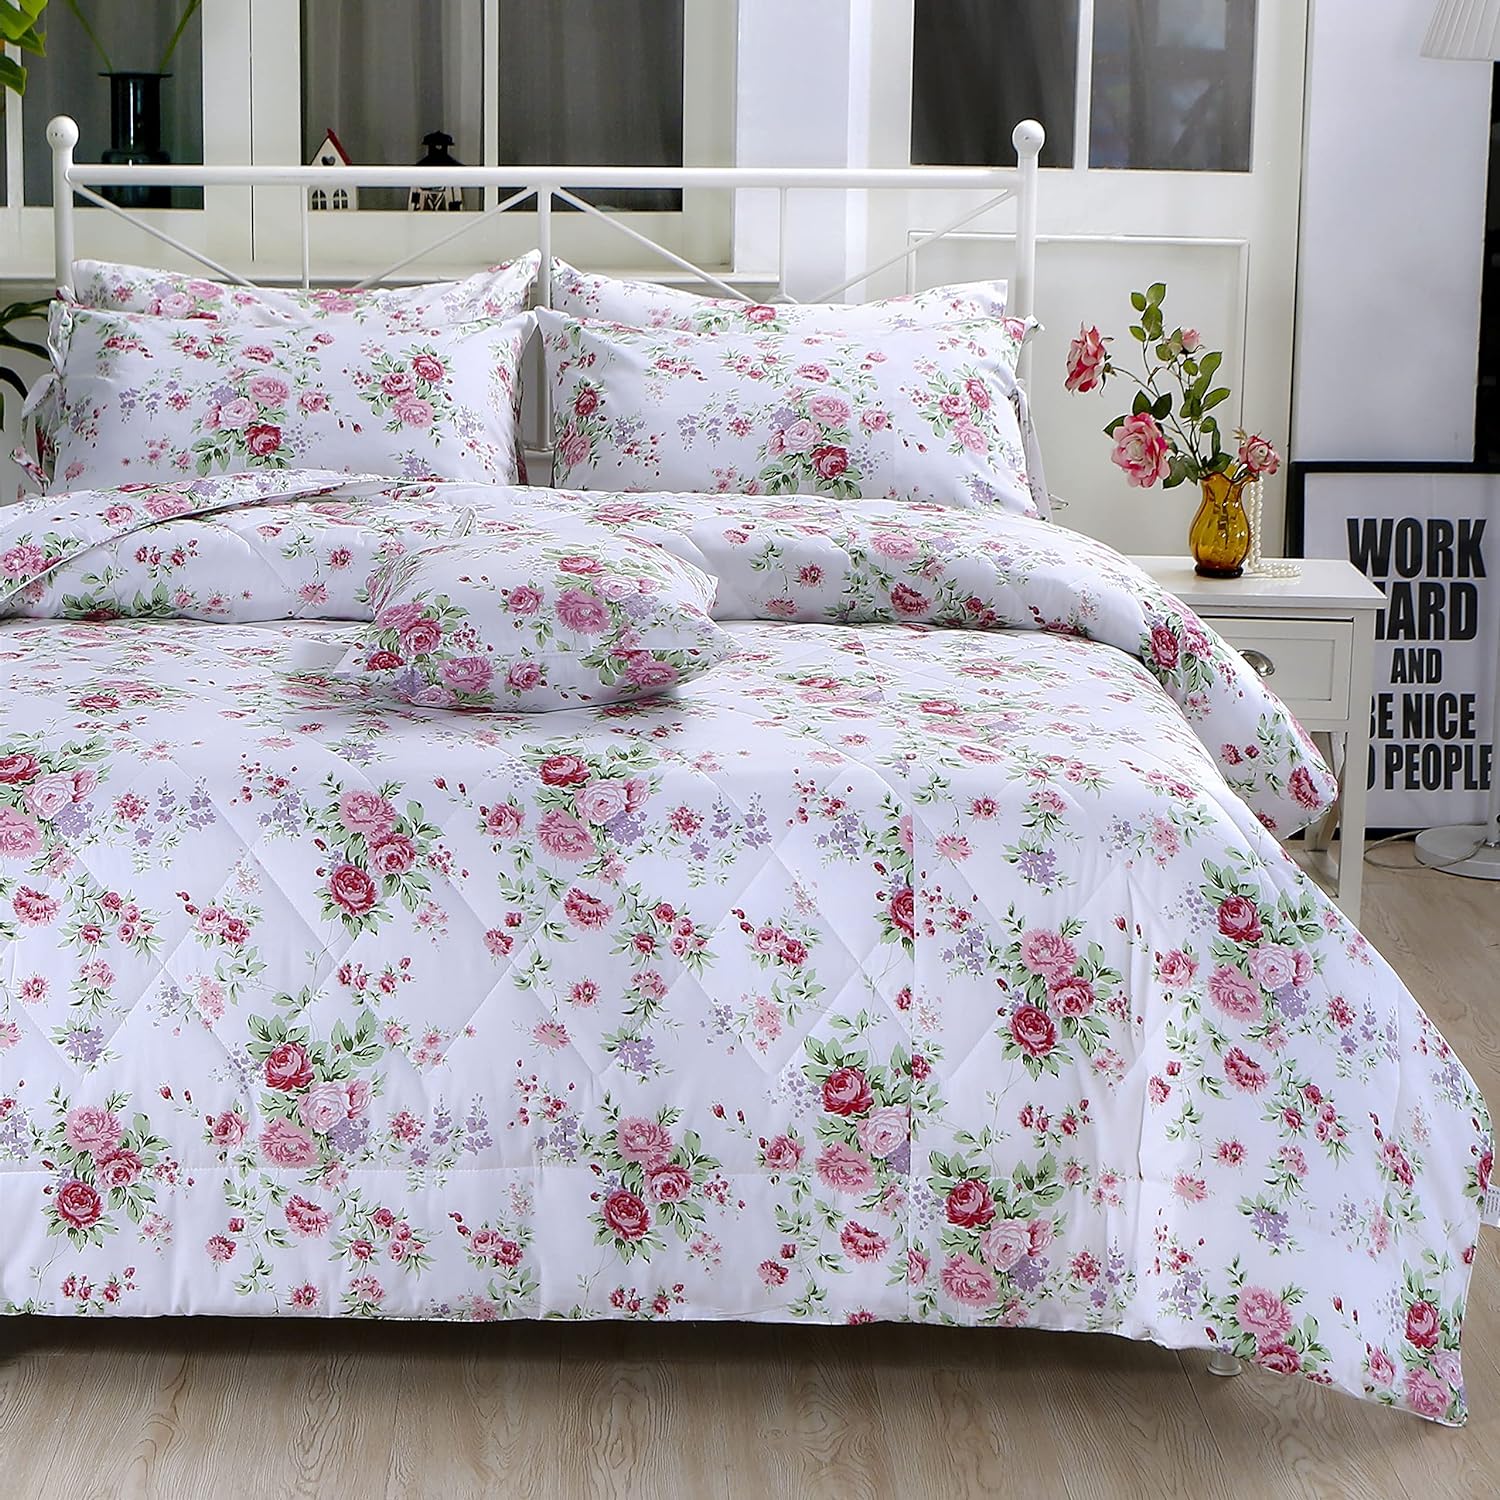 FADFAY Rose Floral Comforter Set Twin Shabby Floral Summer Quilt 100% Cotton Fabric with Soft Microfiber Inner Fill Bedding Lightweight Reversible All Season Down Alternative Duvet Insert 3Pcs, Twin